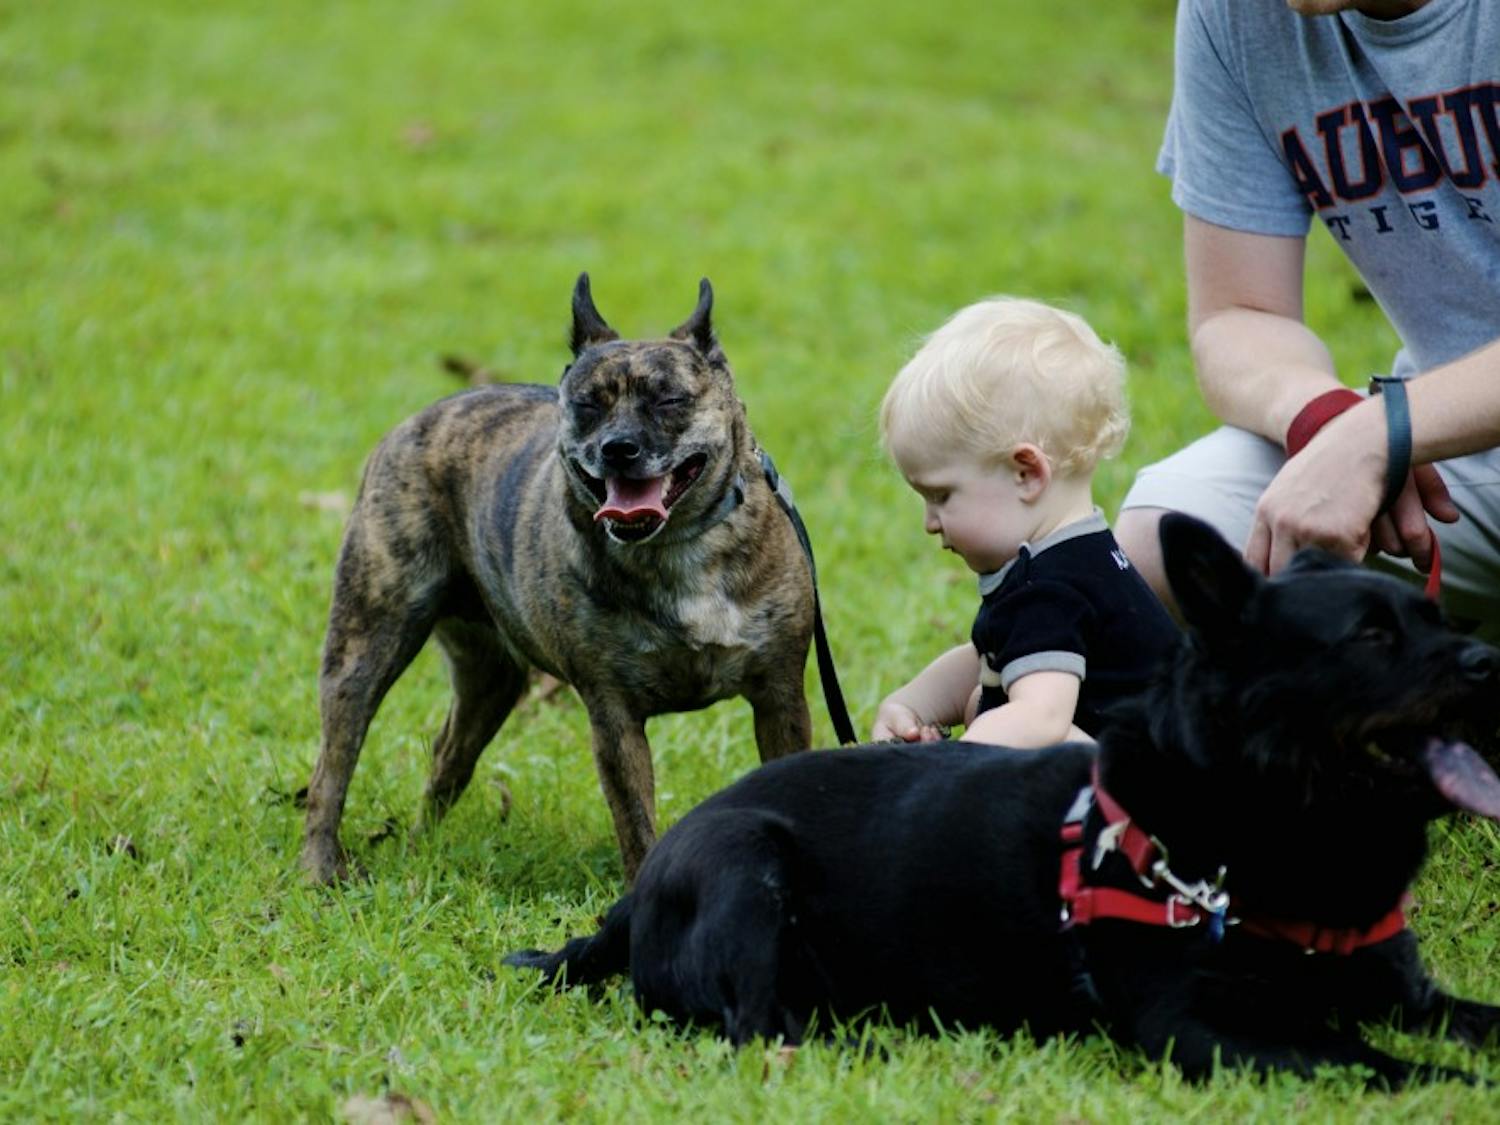 A baby plays with dogs during Puppy Palooza at Kiesel Park on Saturday, Sept. 23, 2017 in Auburn, Ala.